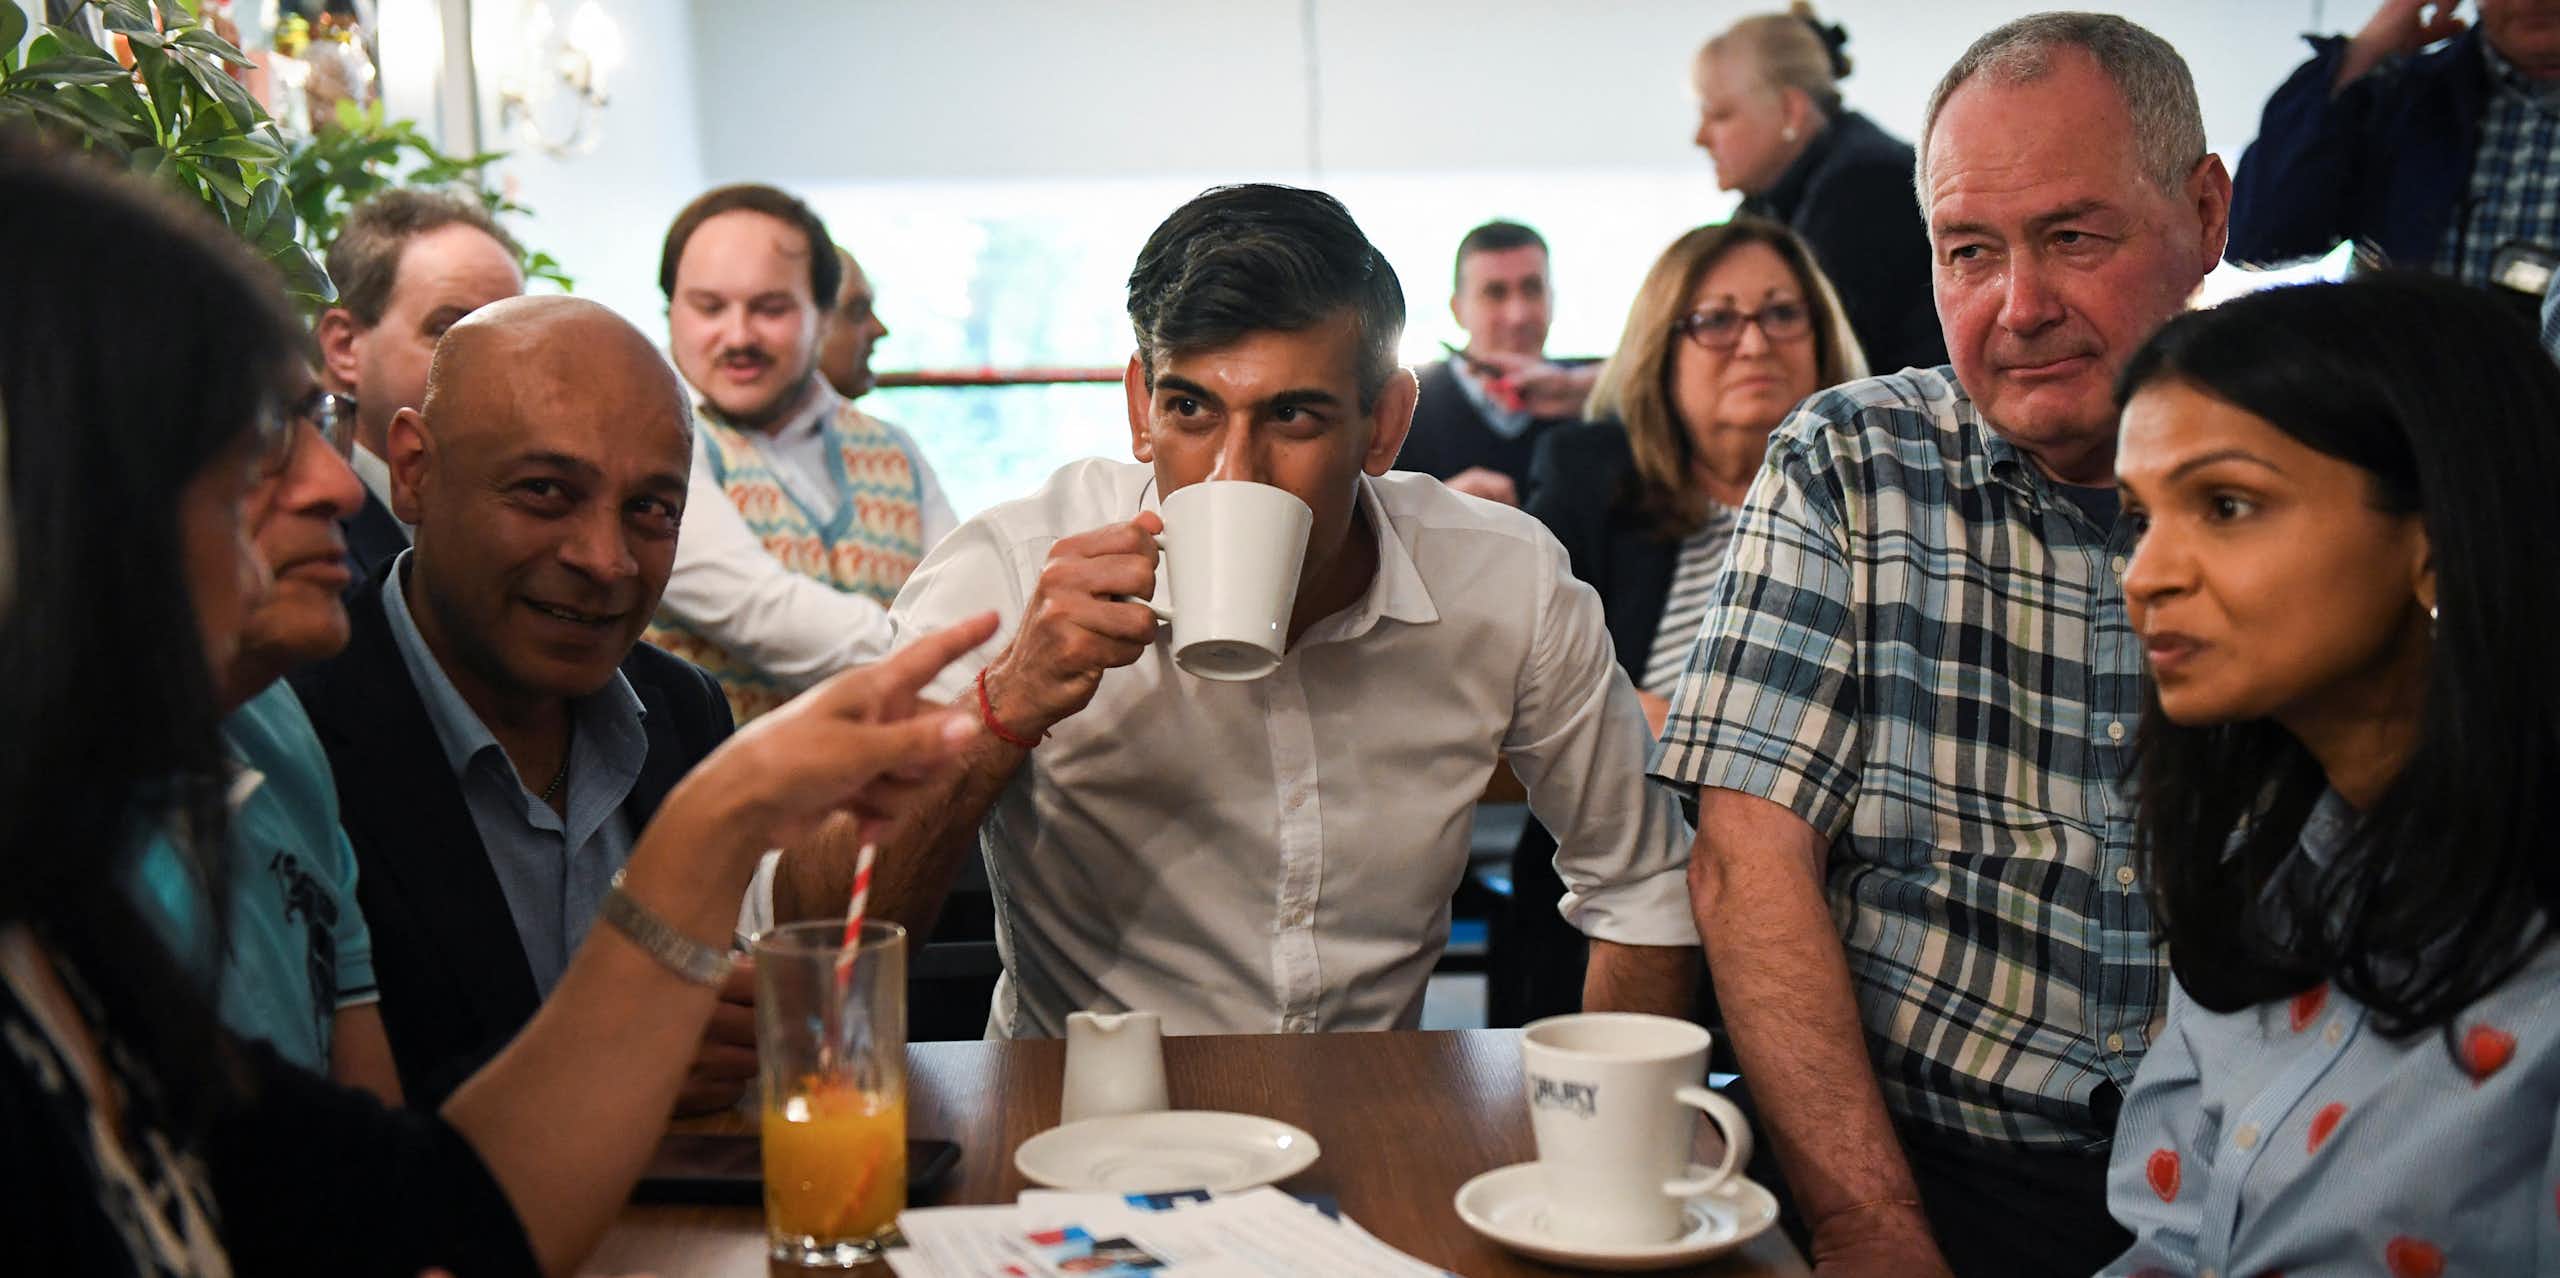 A man in a white shirt drinks a cup of tea surrounded by other people.